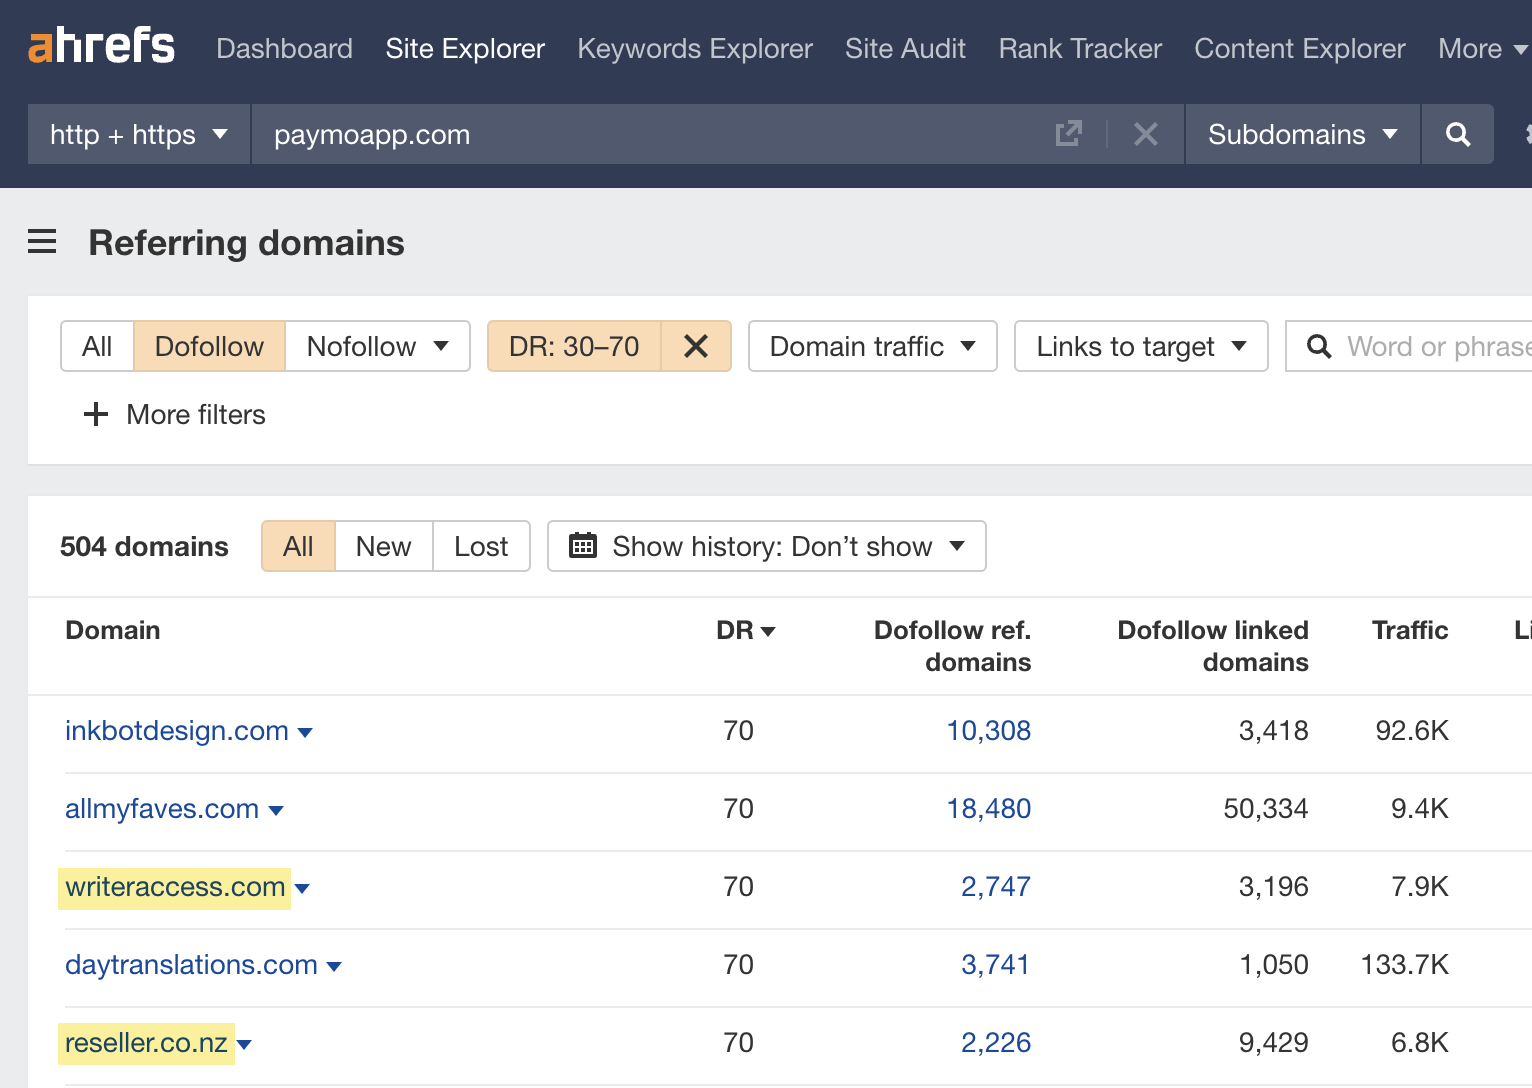 Referring domains report results 